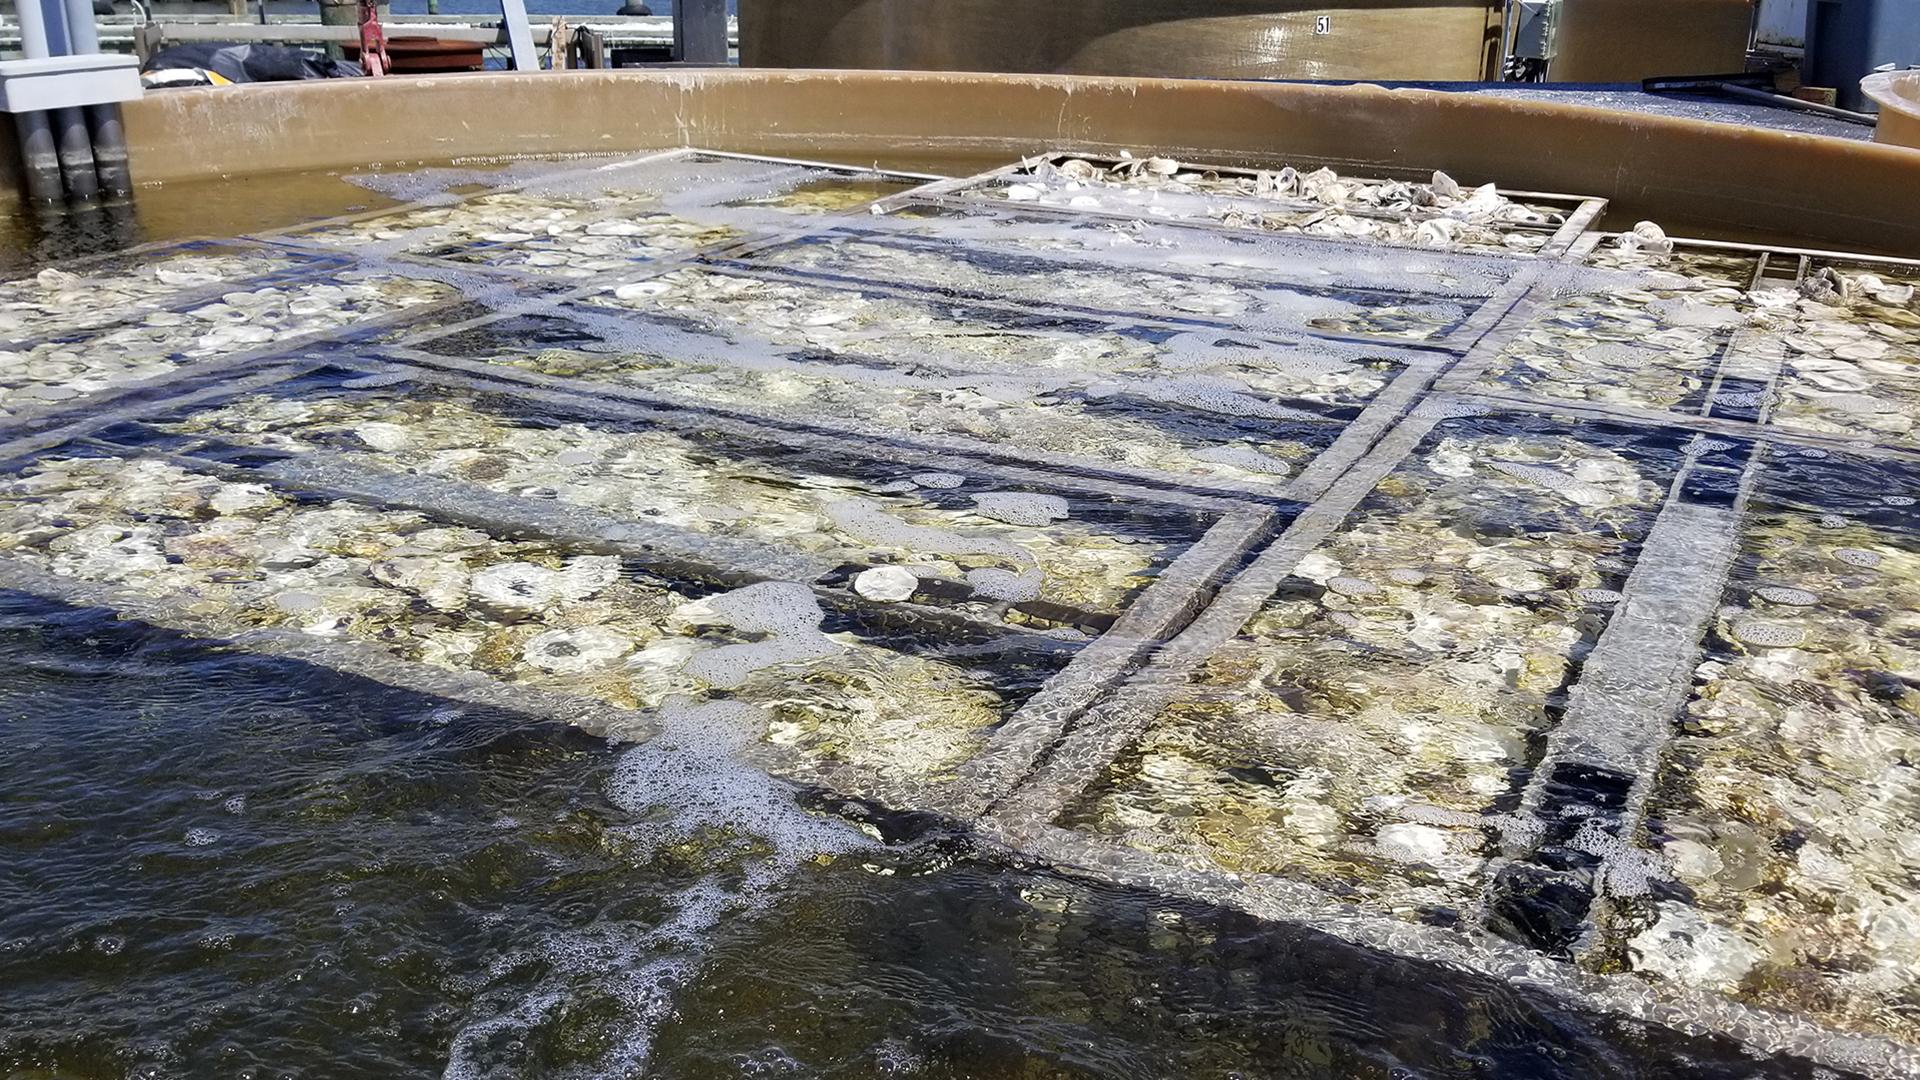 Image of Hatchery tanks full of oysters